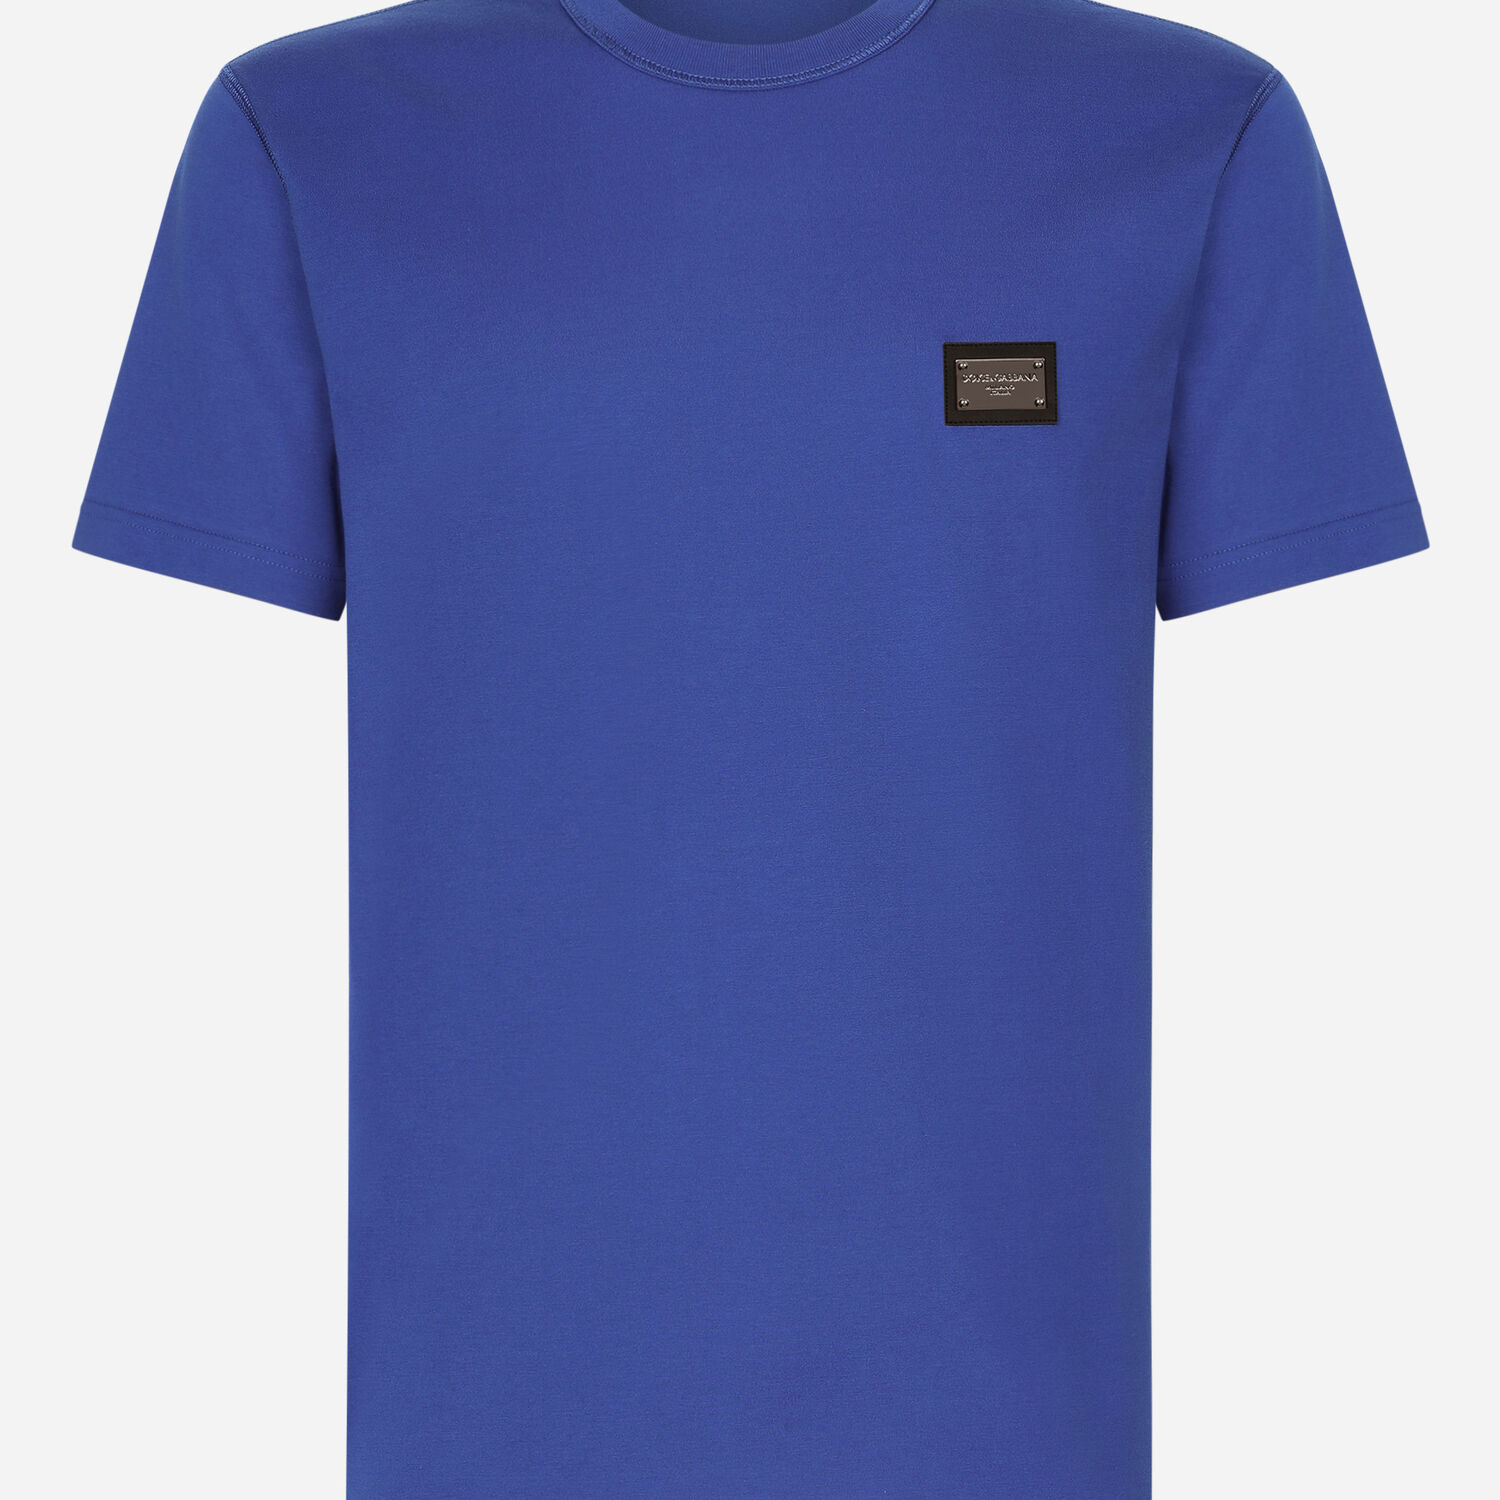 Cotton T-shirt with branded tag in Blue for | Dolce&Gabbana® US